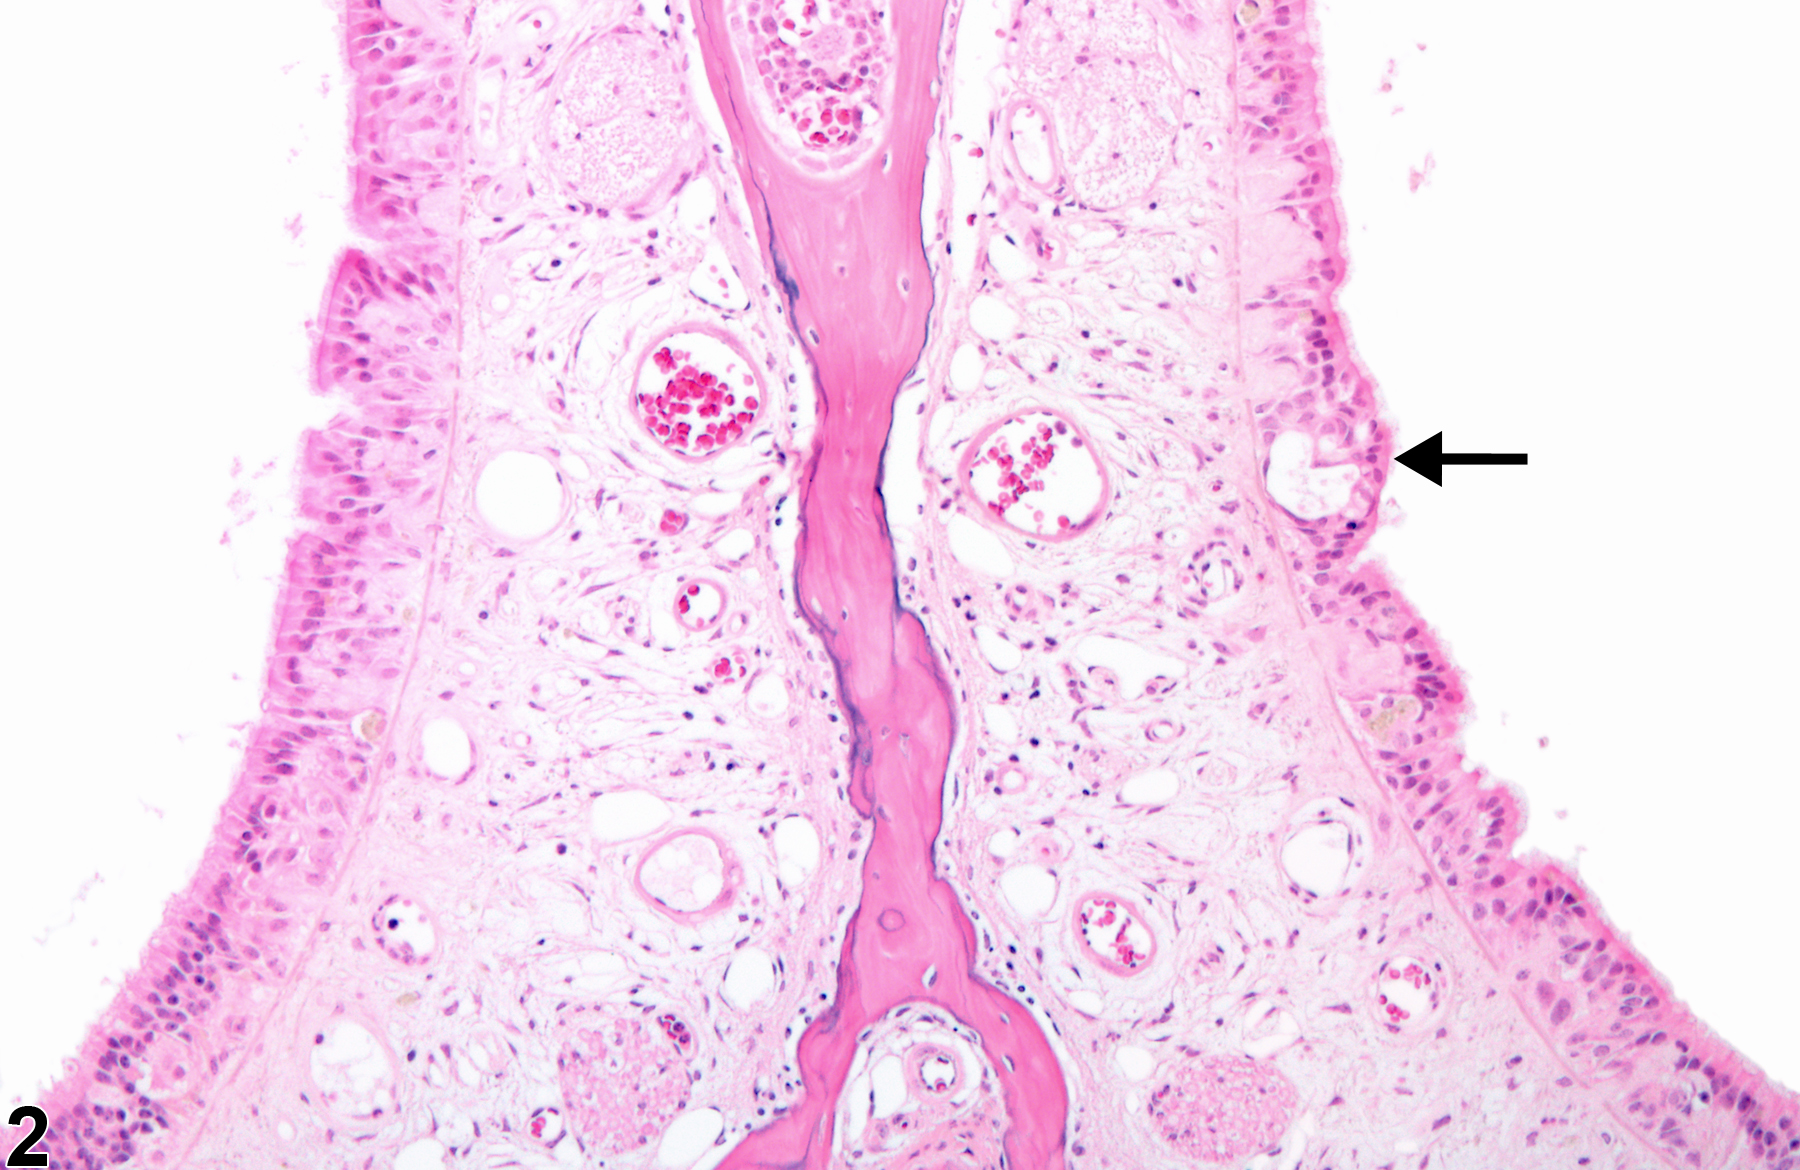 Image of degeneration in the nose, olfactory epithelium from a female B6C3F1/N mouse in a chronic study